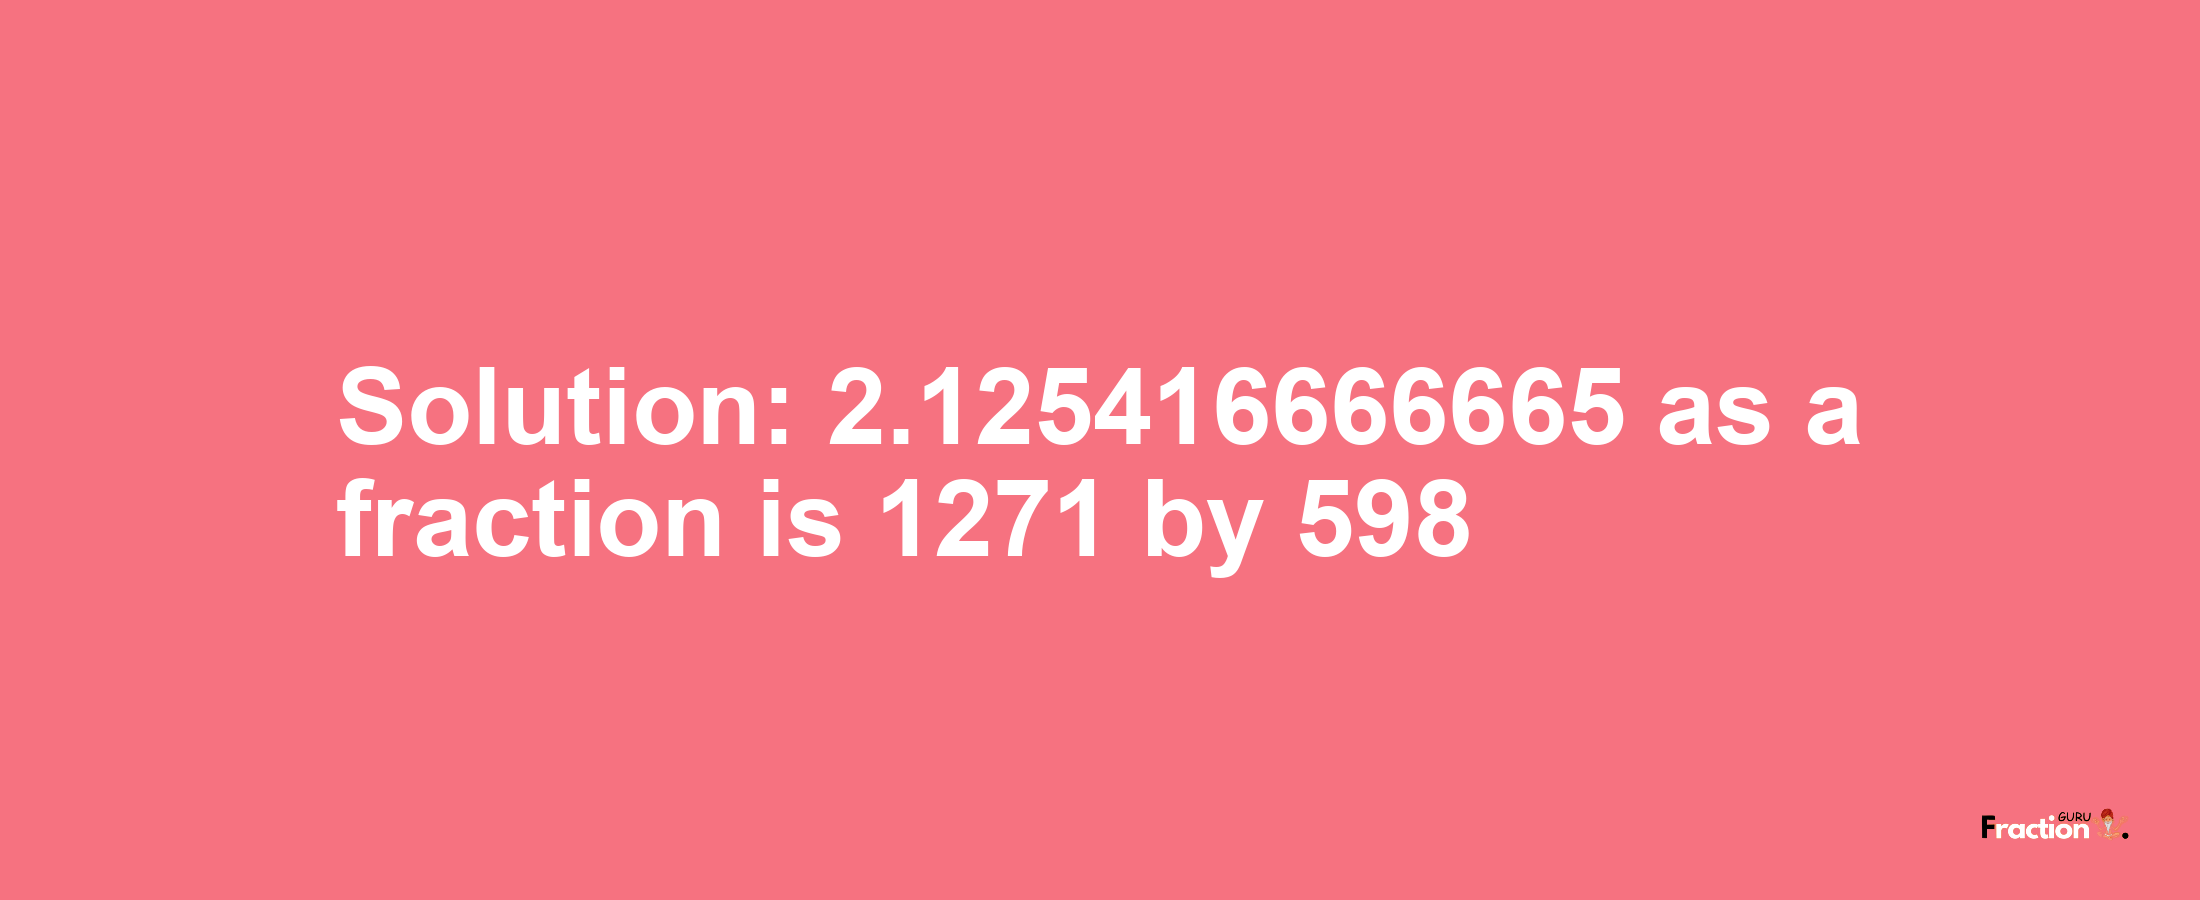 Solution:2.125416666665 as a fraction is 1271/598